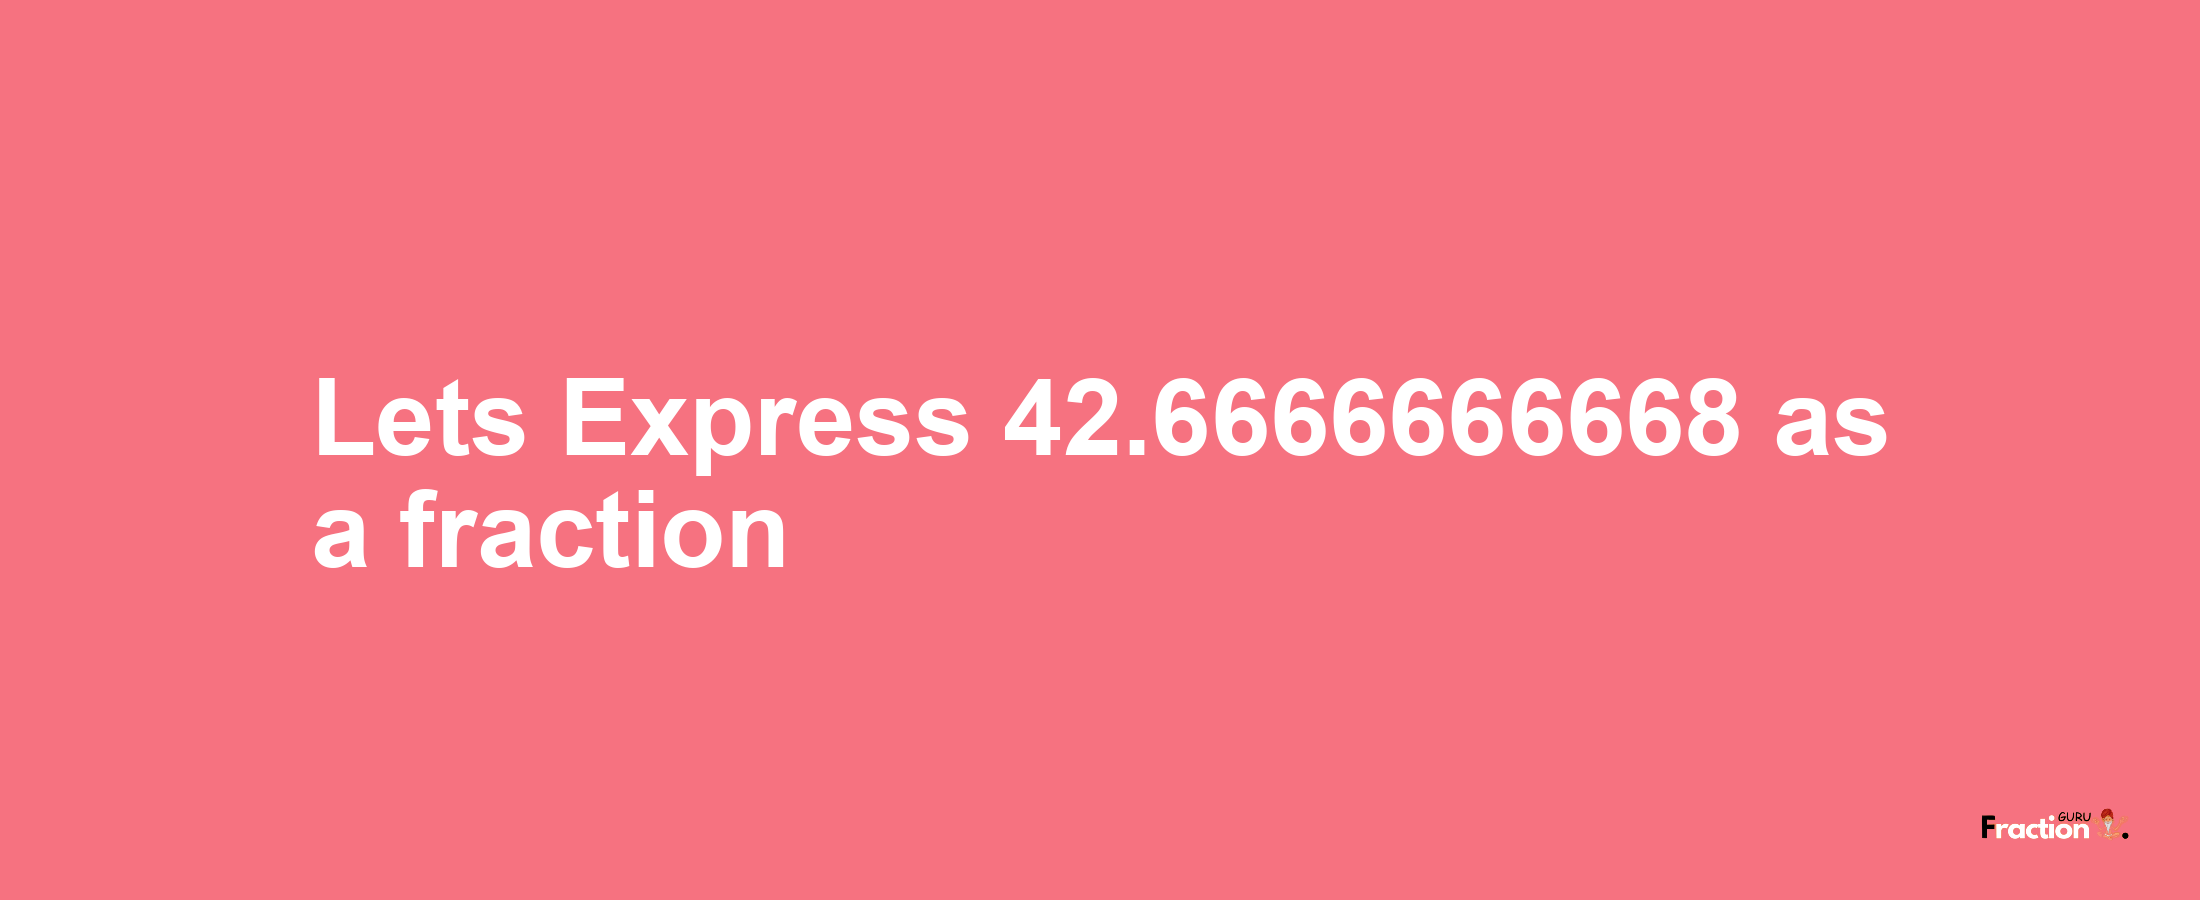 Lets Express 42.6666666668 as afraction